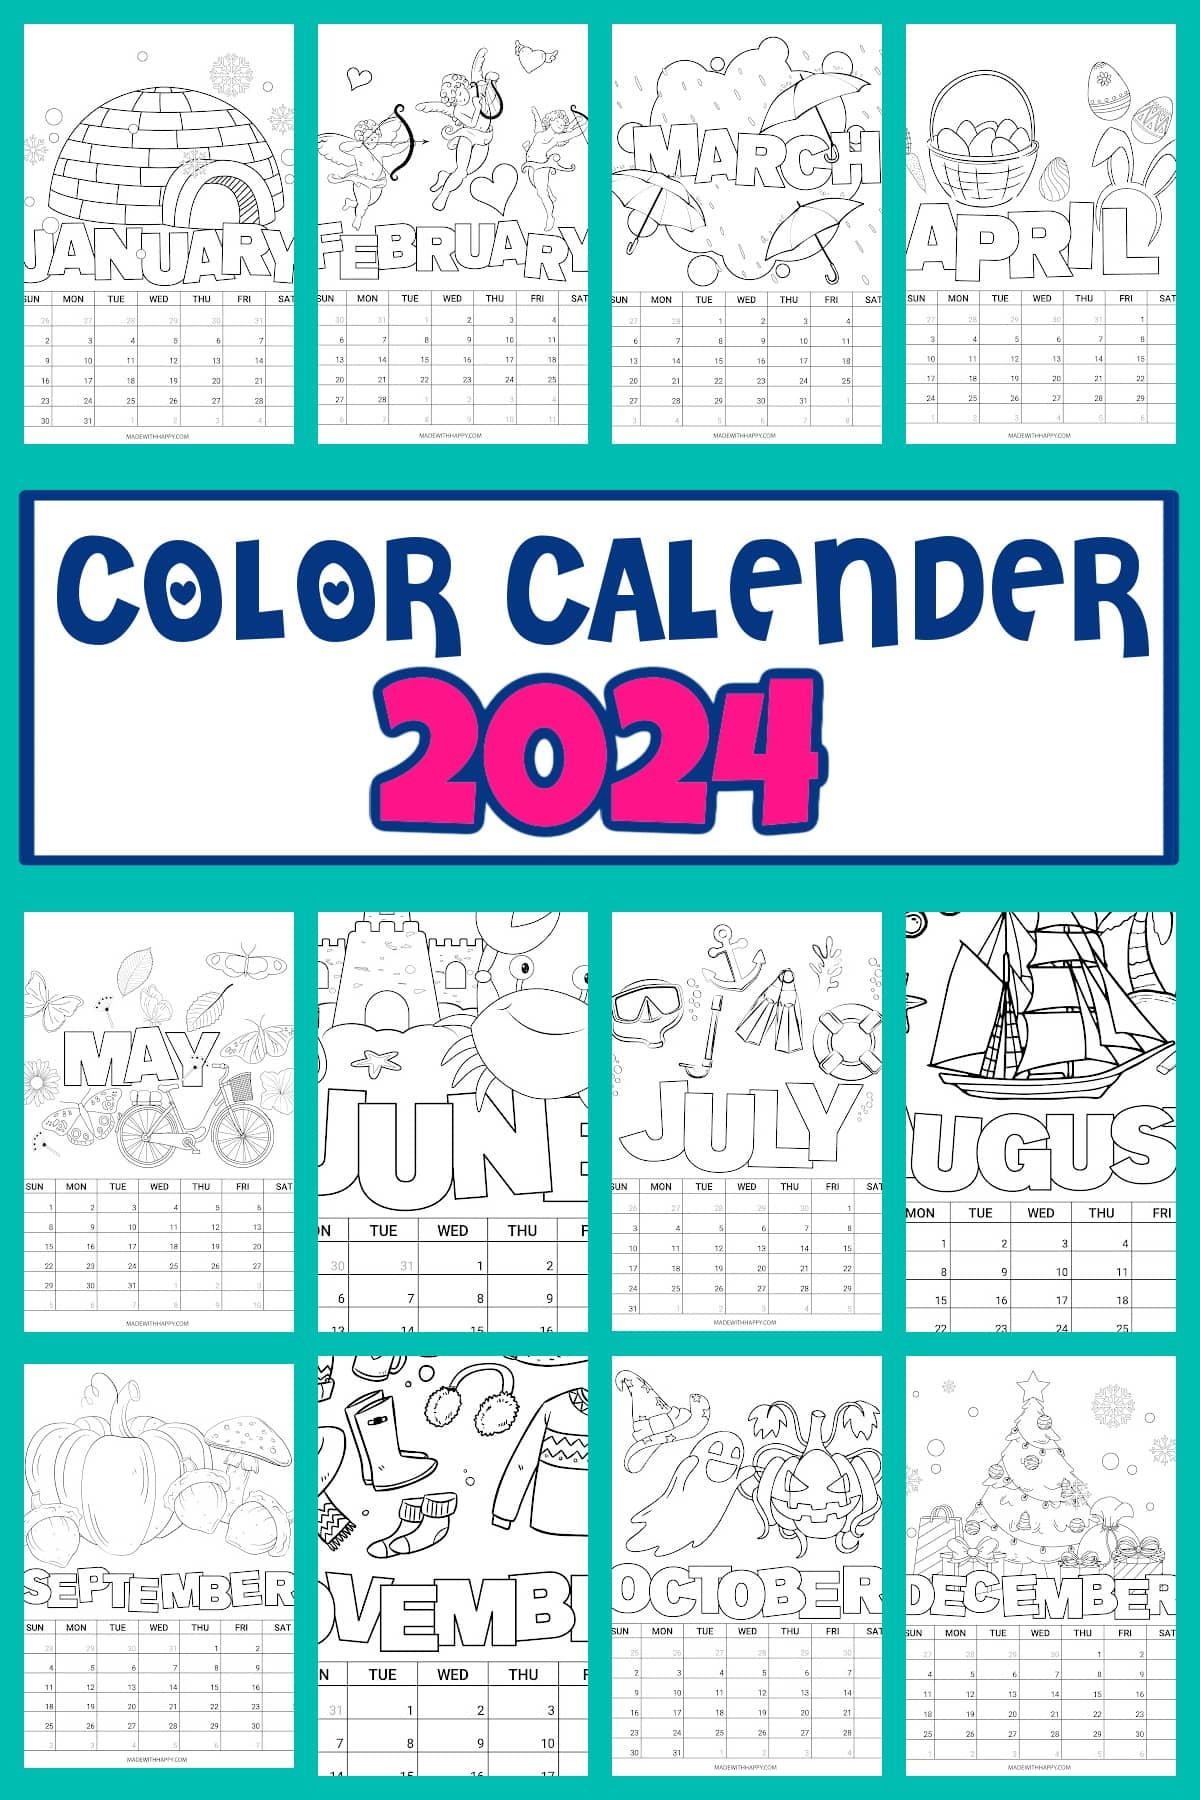 2024 Printable Coloring Calendar For Kids - Made With Happy with Free Printable Calendar 2024 For Preschoolers